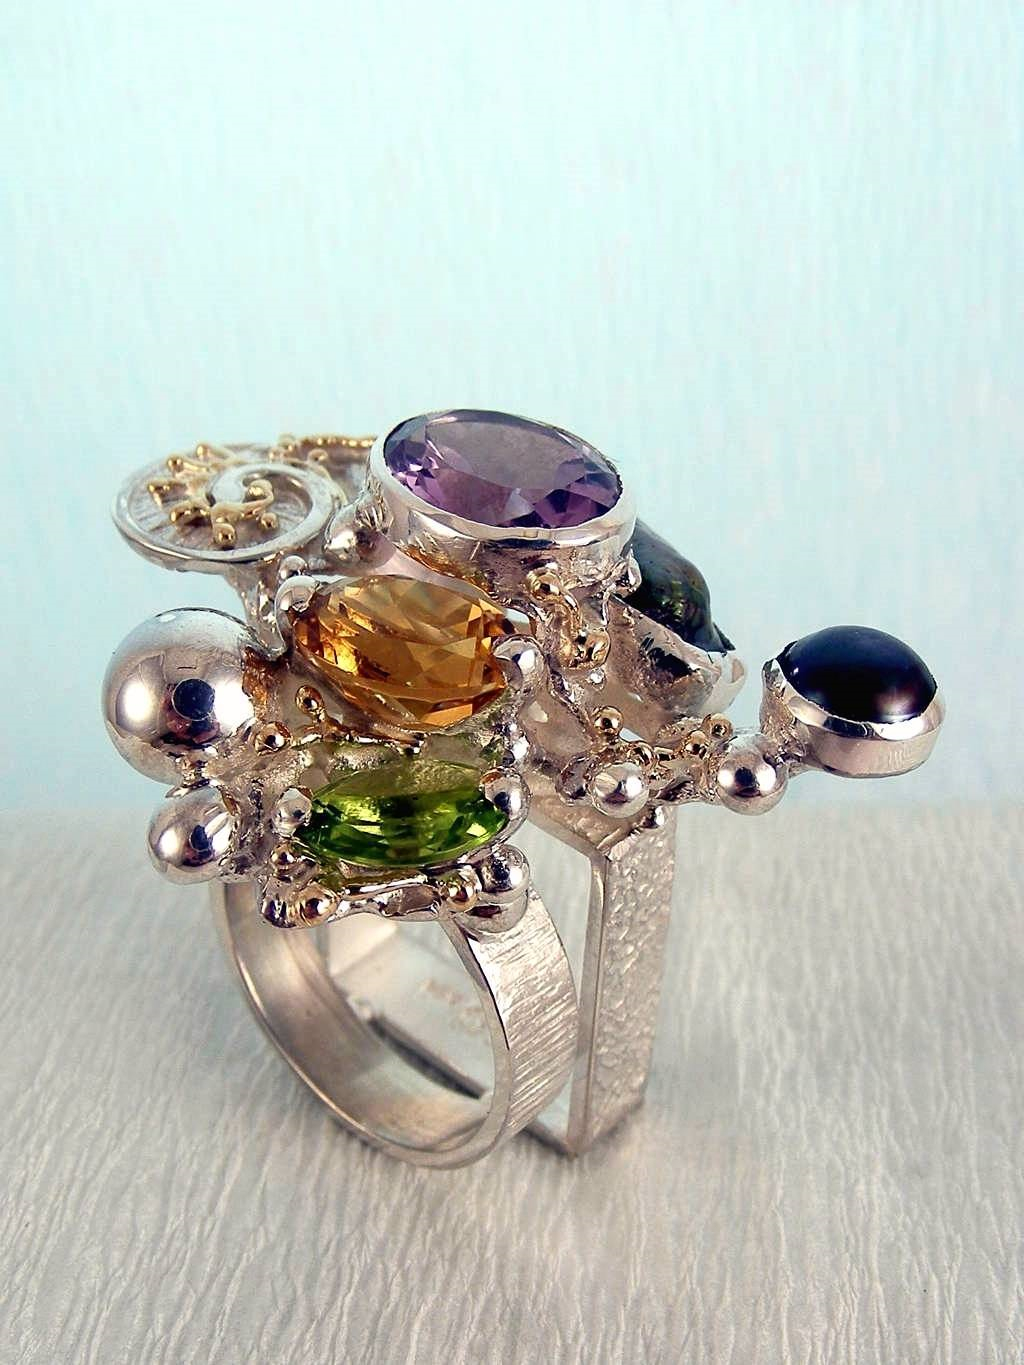 jewelry with semi precious stones, jewelry that has solid 14 karat gold, facet cut gemstones in jewelry, gregory pyra piro cyber ring 1565, mixed metal silver and gold jewelelry, rings in art and craft galleries, cyber rings for women with amethyst and peridot, cyber rings for women with amethyst and citrine, cyber rings for women with citrine and peridot